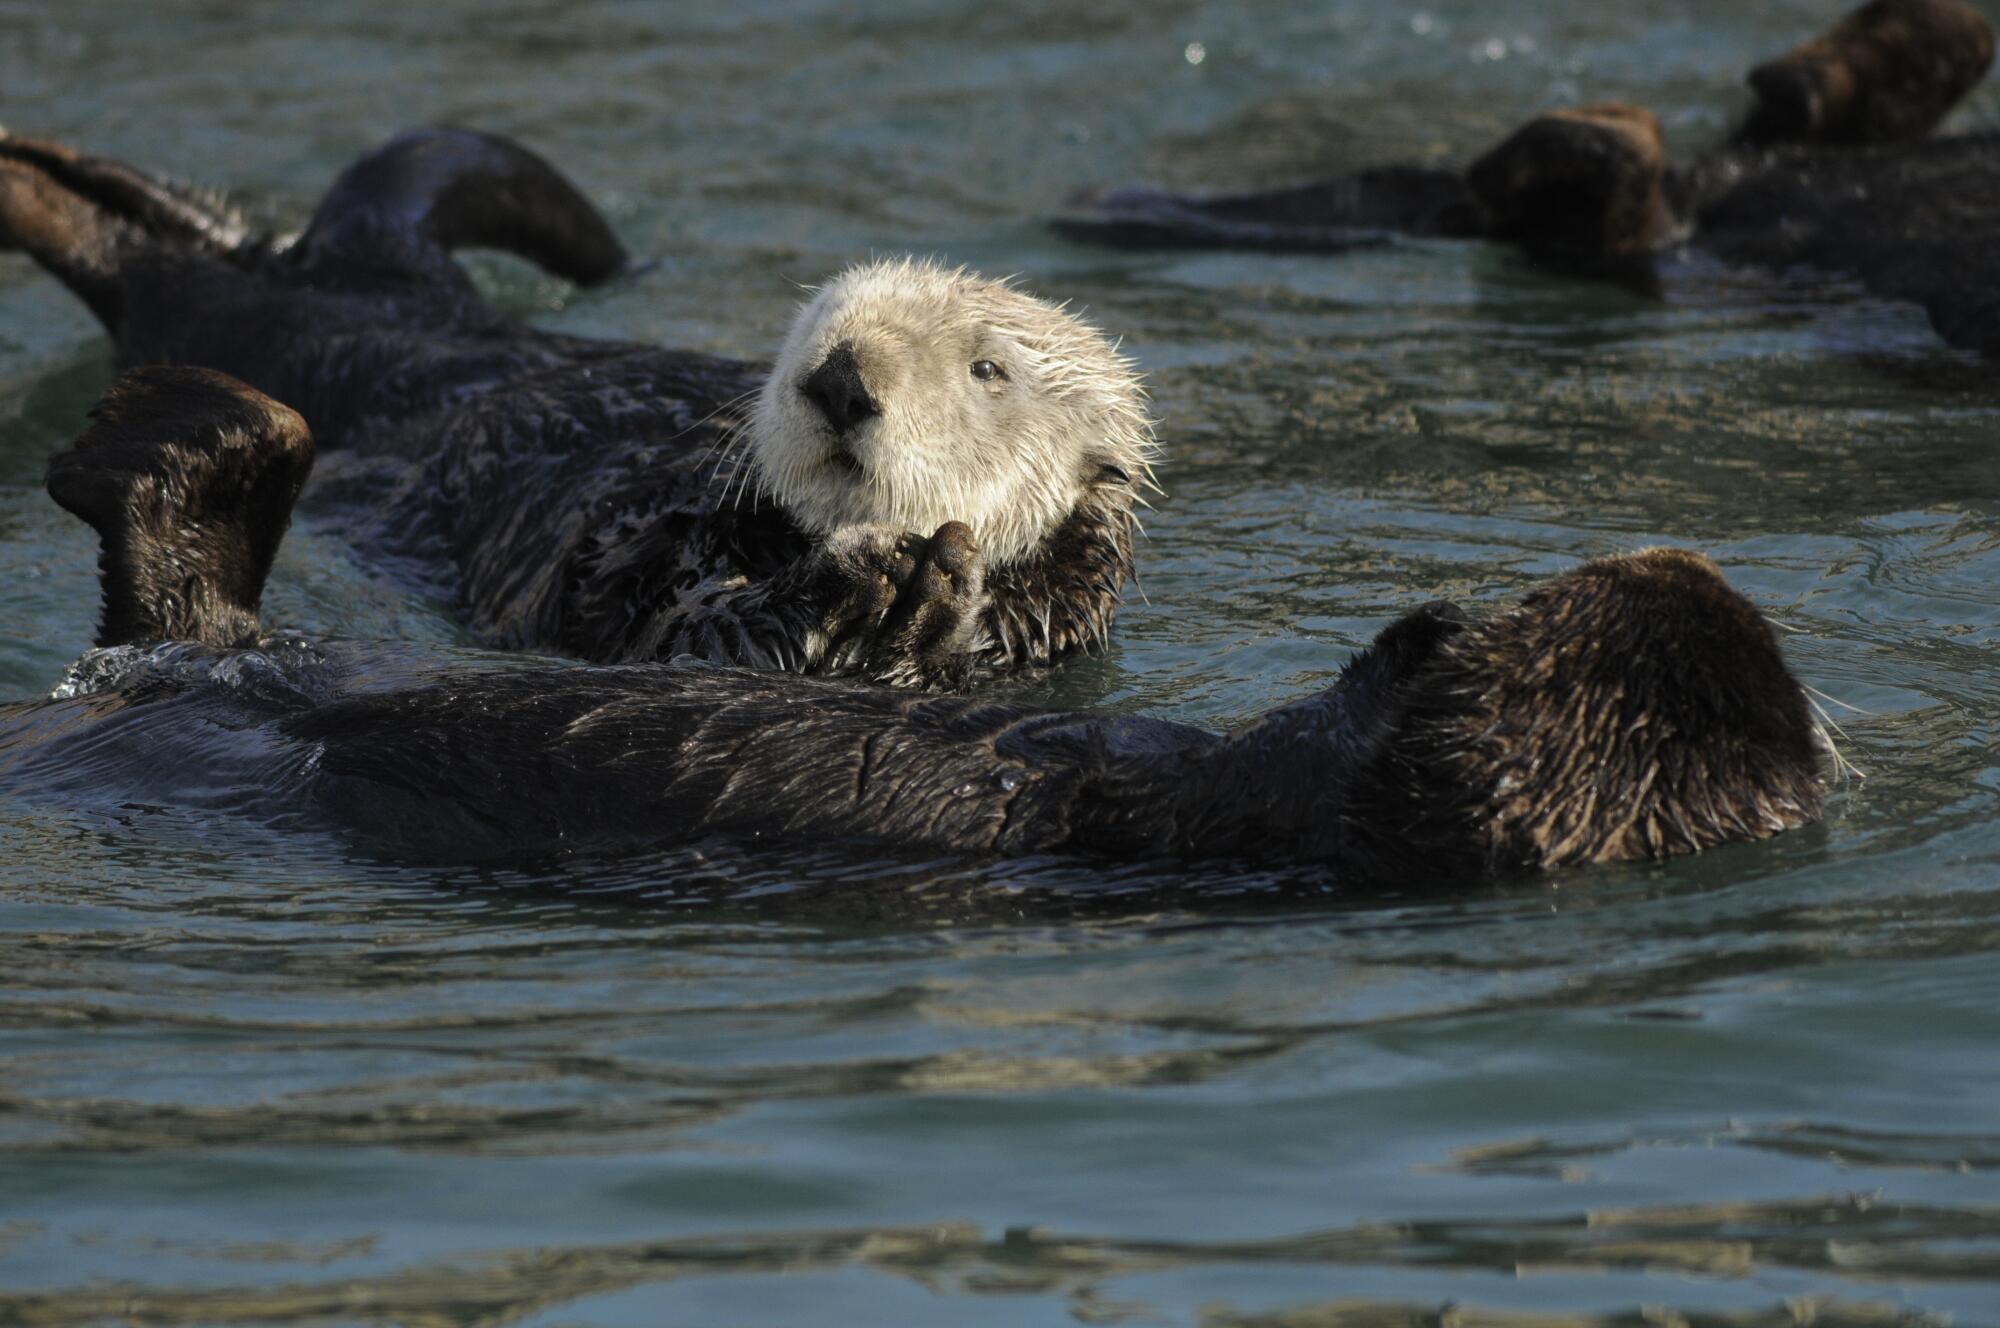 Sea otters relax while floating on their backs.